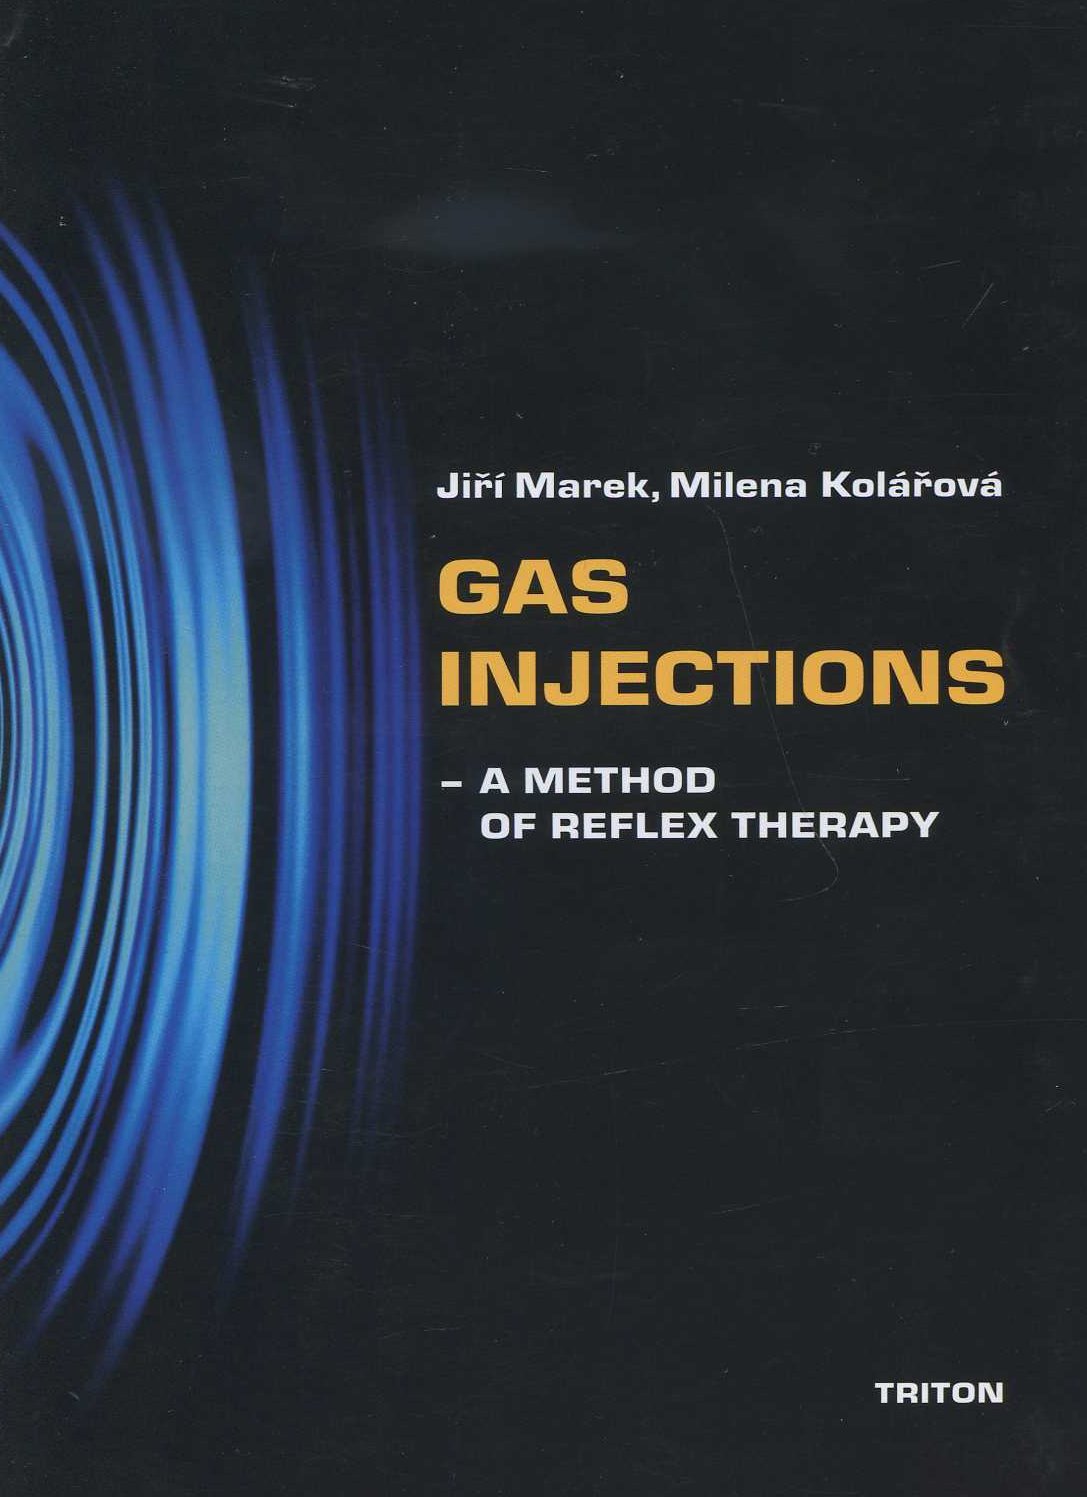 Gas injections - a method of reflex therapy